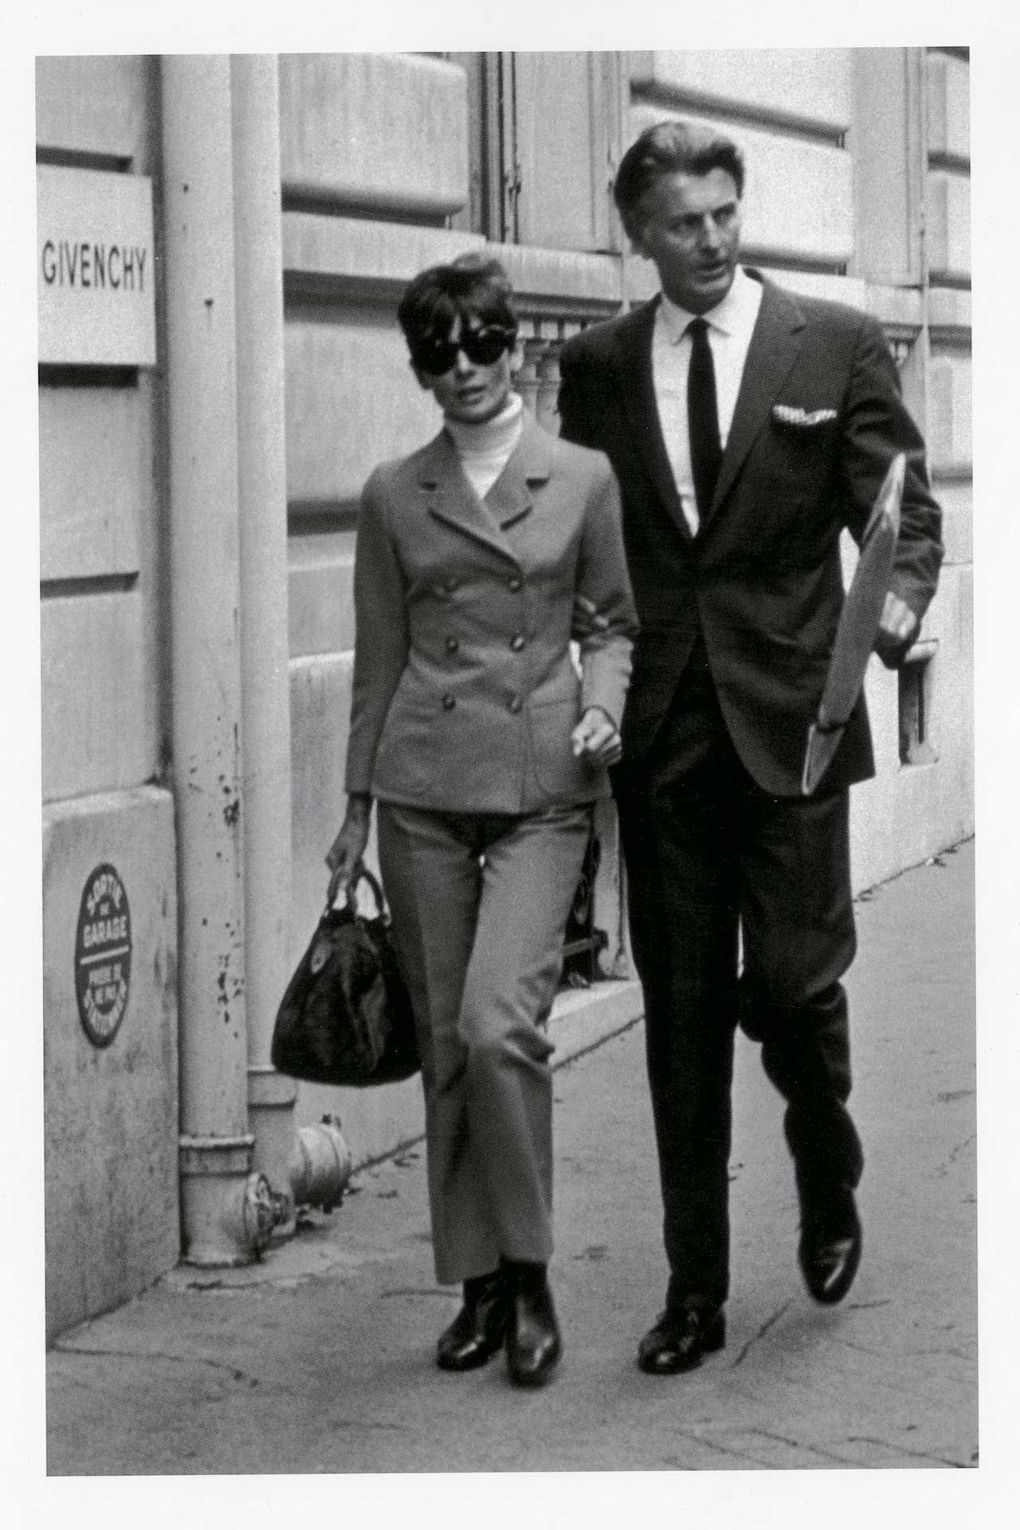 Hubert de Givenchy and Audrey Hepburn in Paris, 1960s (Photo: From the collection of Hubert de Givenchy)